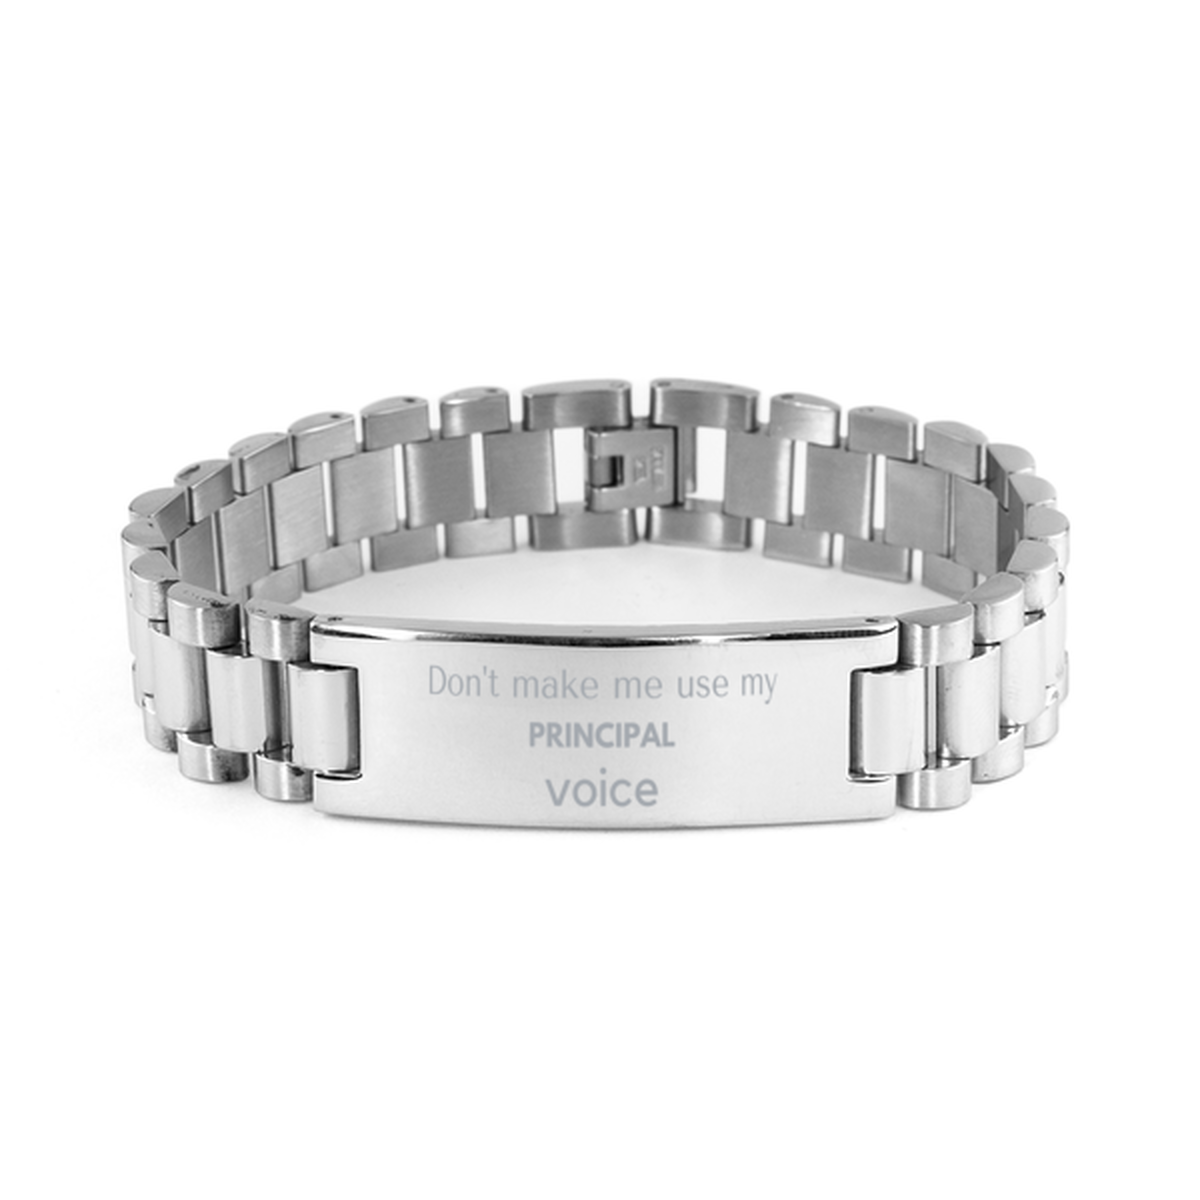 Don't make me use my Principal voice, Sarcasm Principal Gifts, Christmas Principal Ladder Stainless Steel Bracelet Birthday Unique Gifts For Principal Coworkers, Men, Women, Colleague, Friends